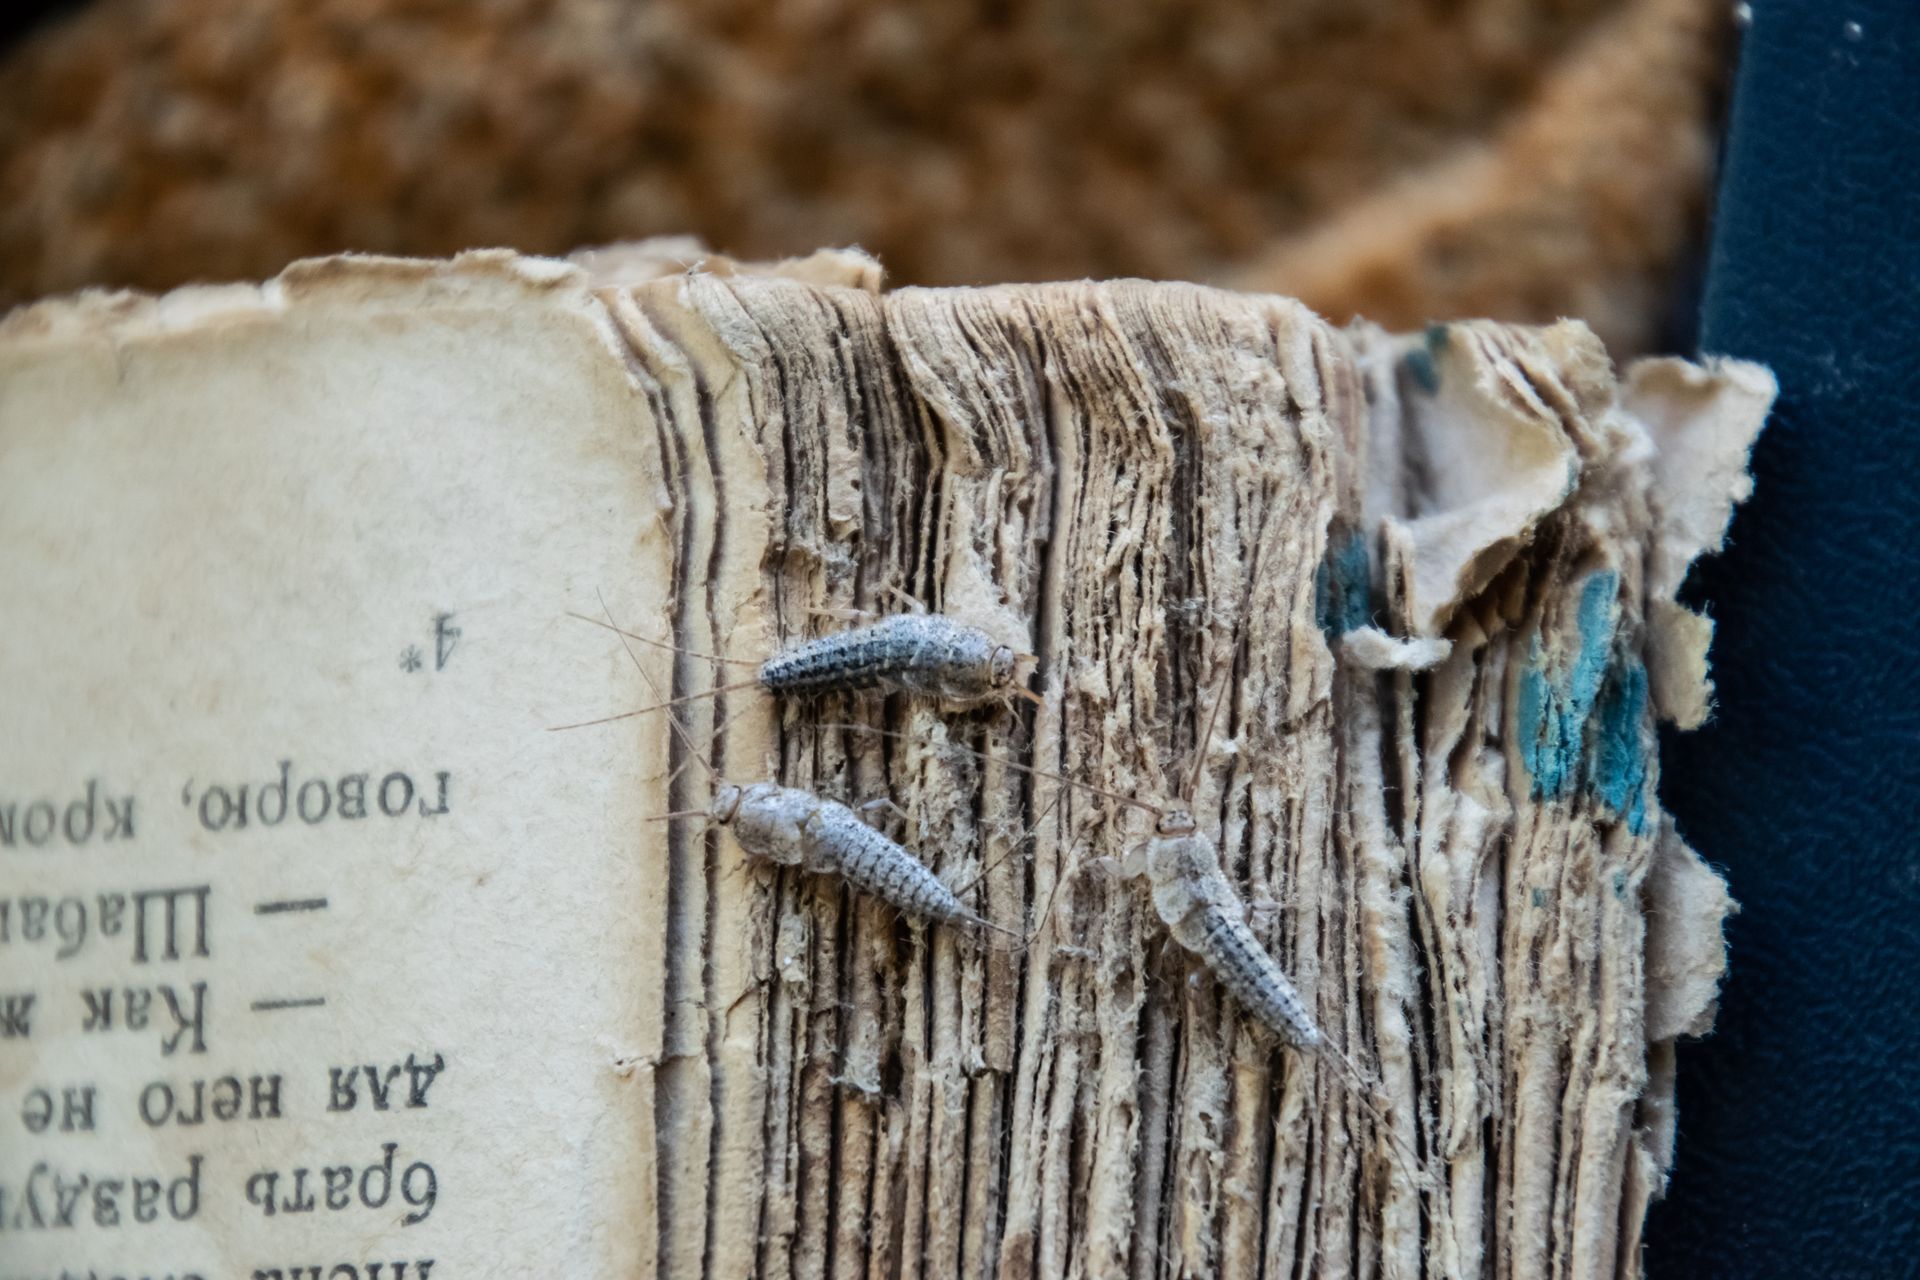 Silverfish eating a book